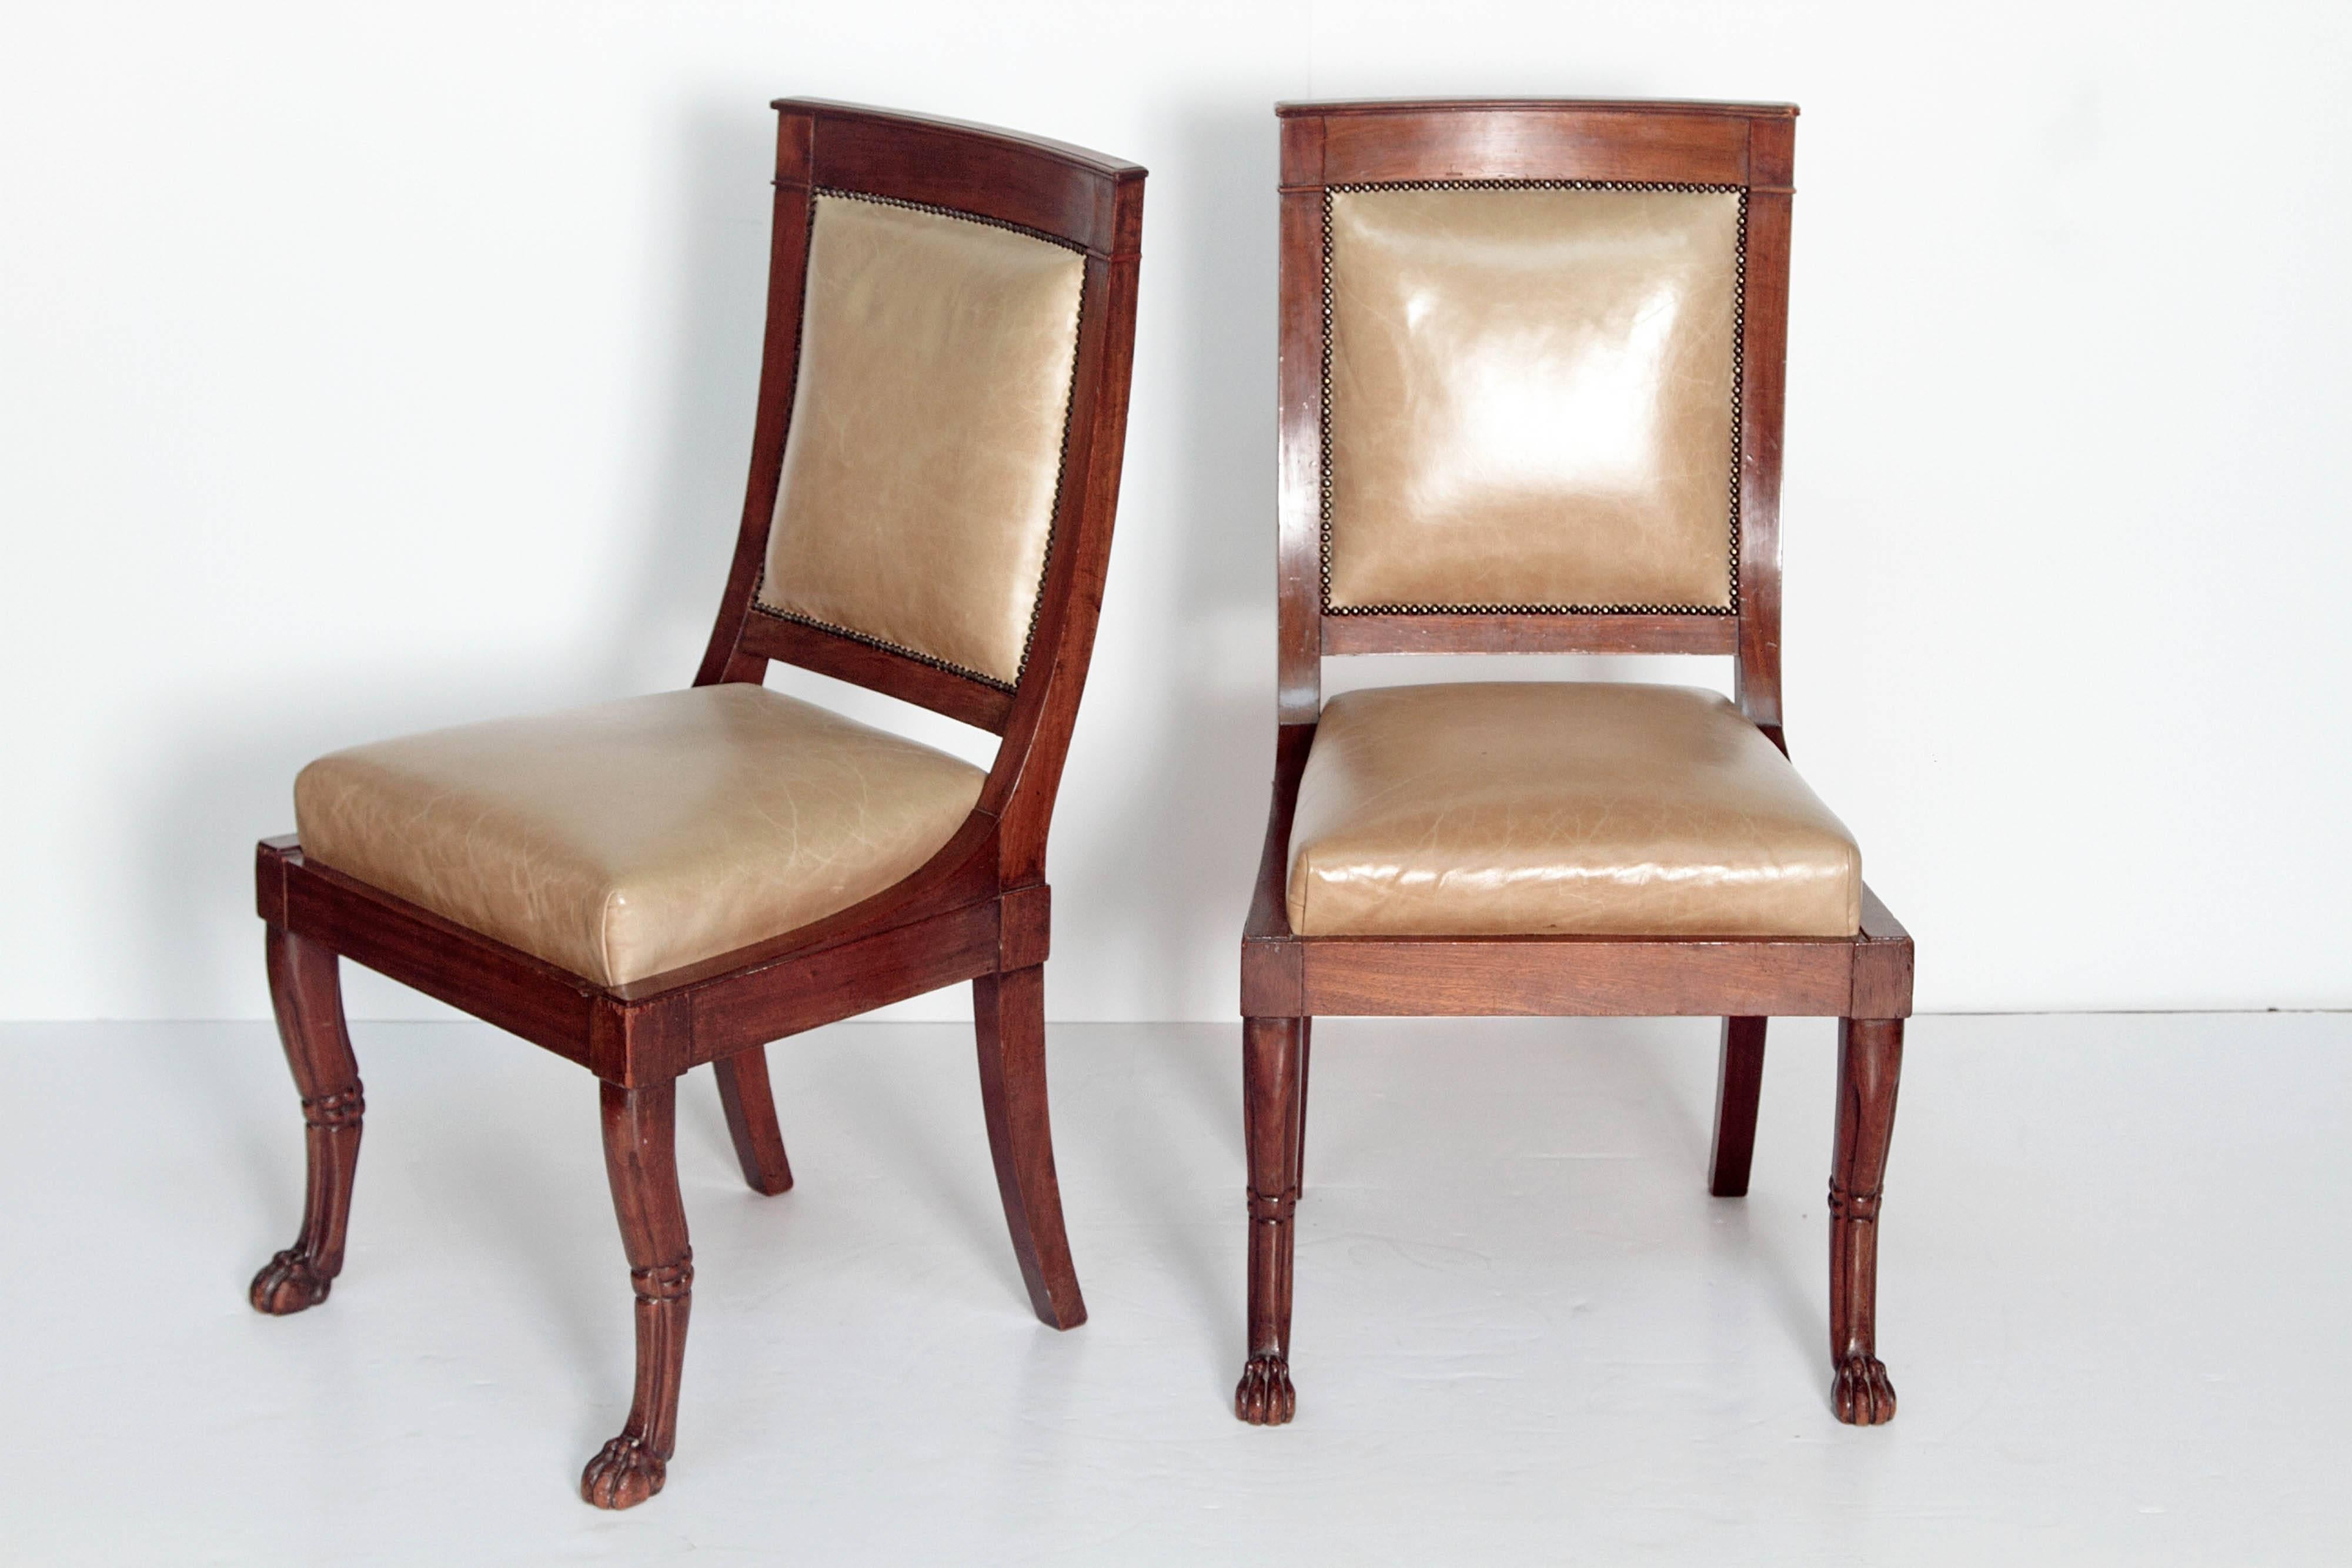 A pair of French neoclassic period chairs. Wood framed backs and seats with paw feets. The chairs are upholstered in beige leather.